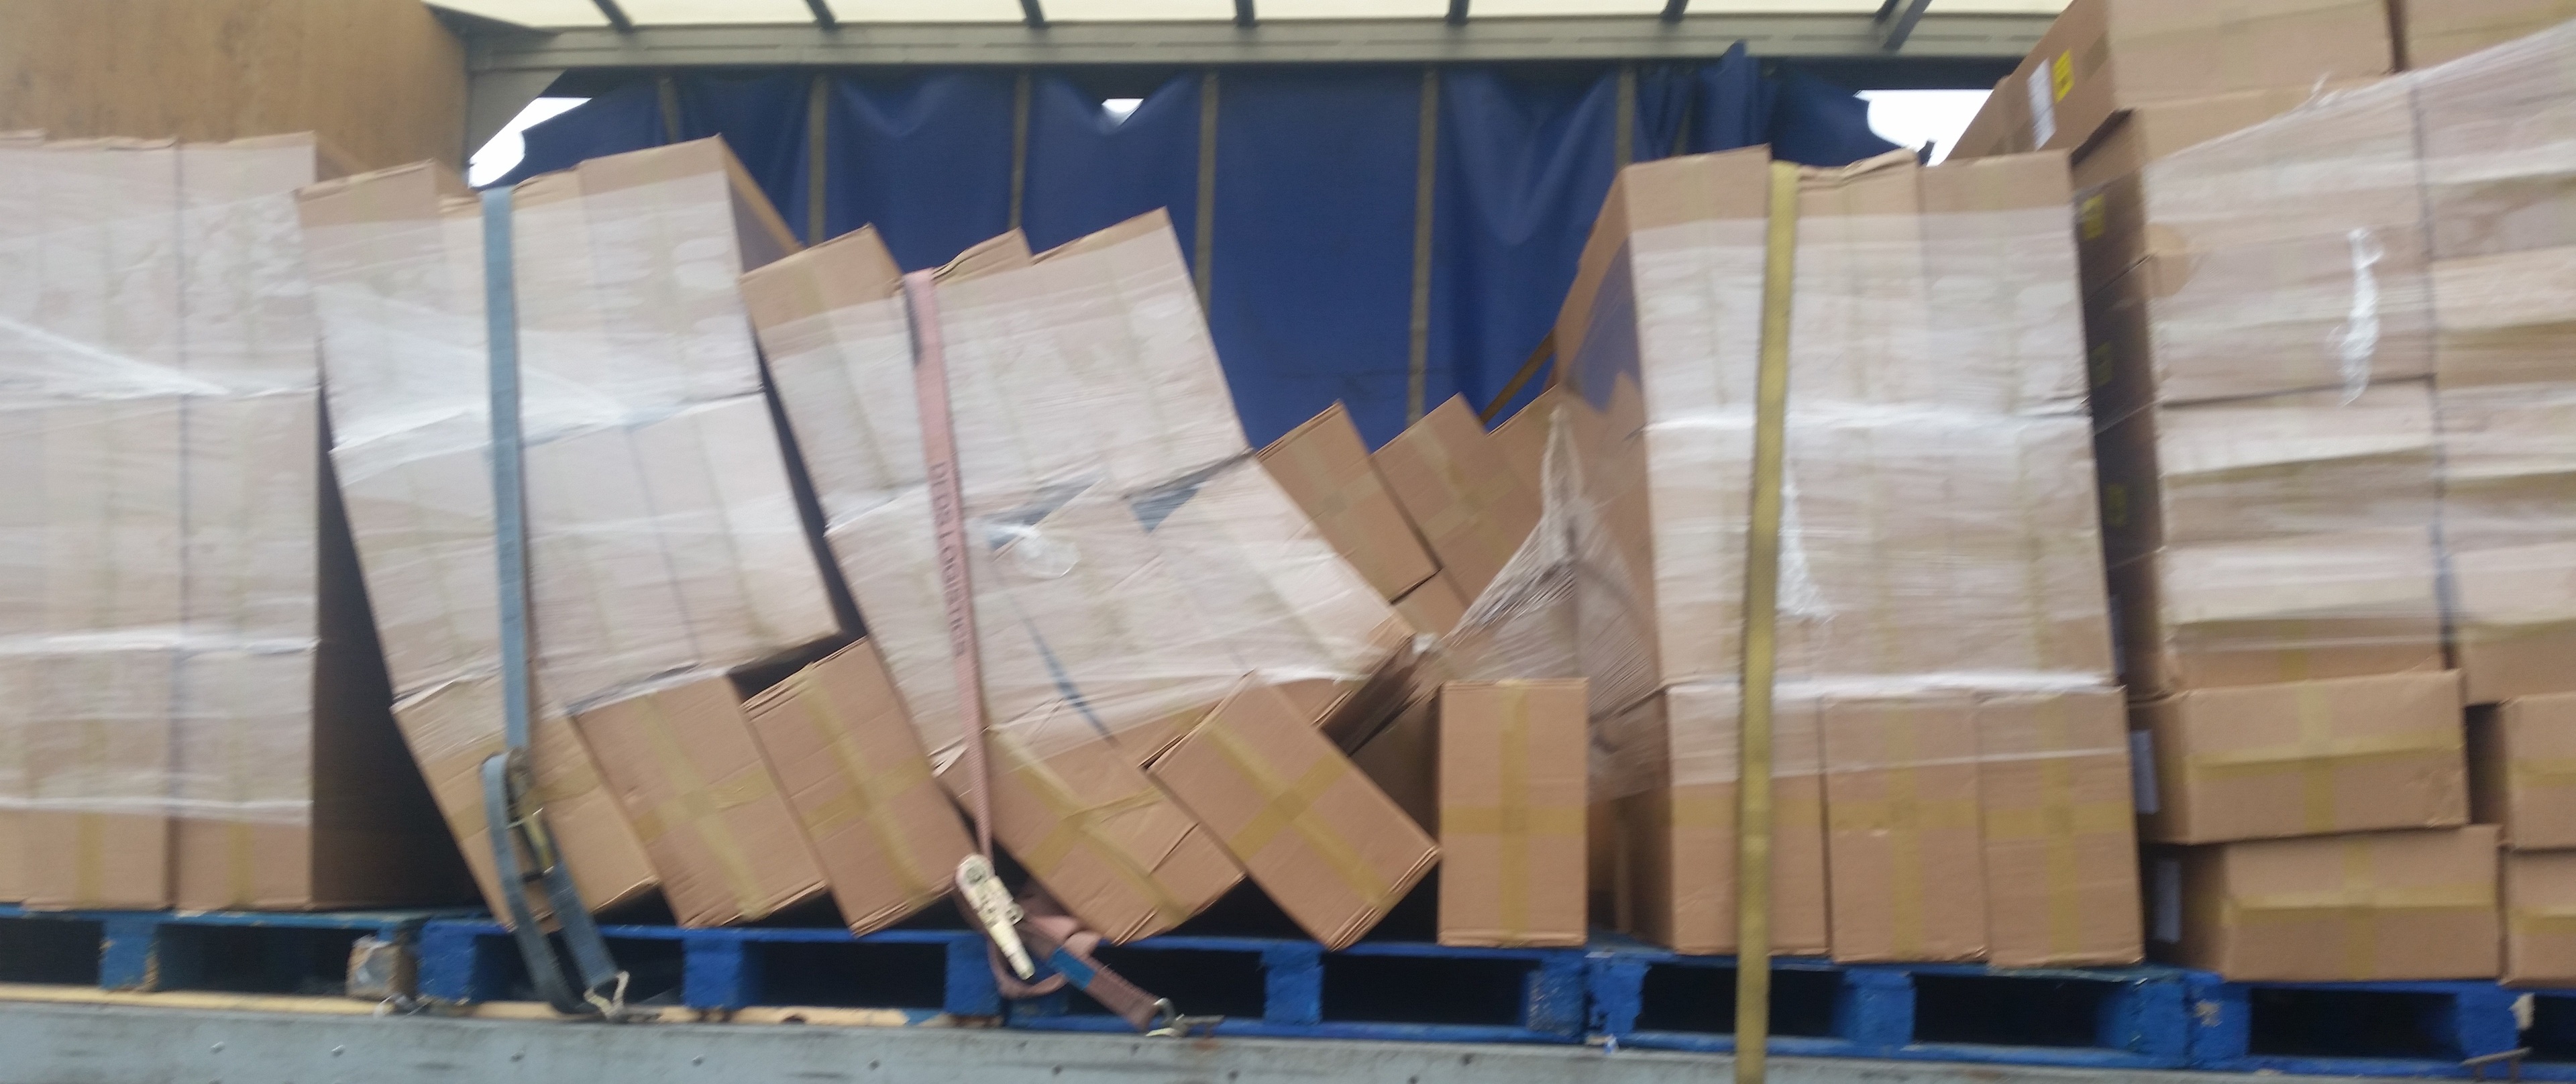 The boxes seized from the Gartcosh area containing suspected illicit cigarettes. Picture: HMRC